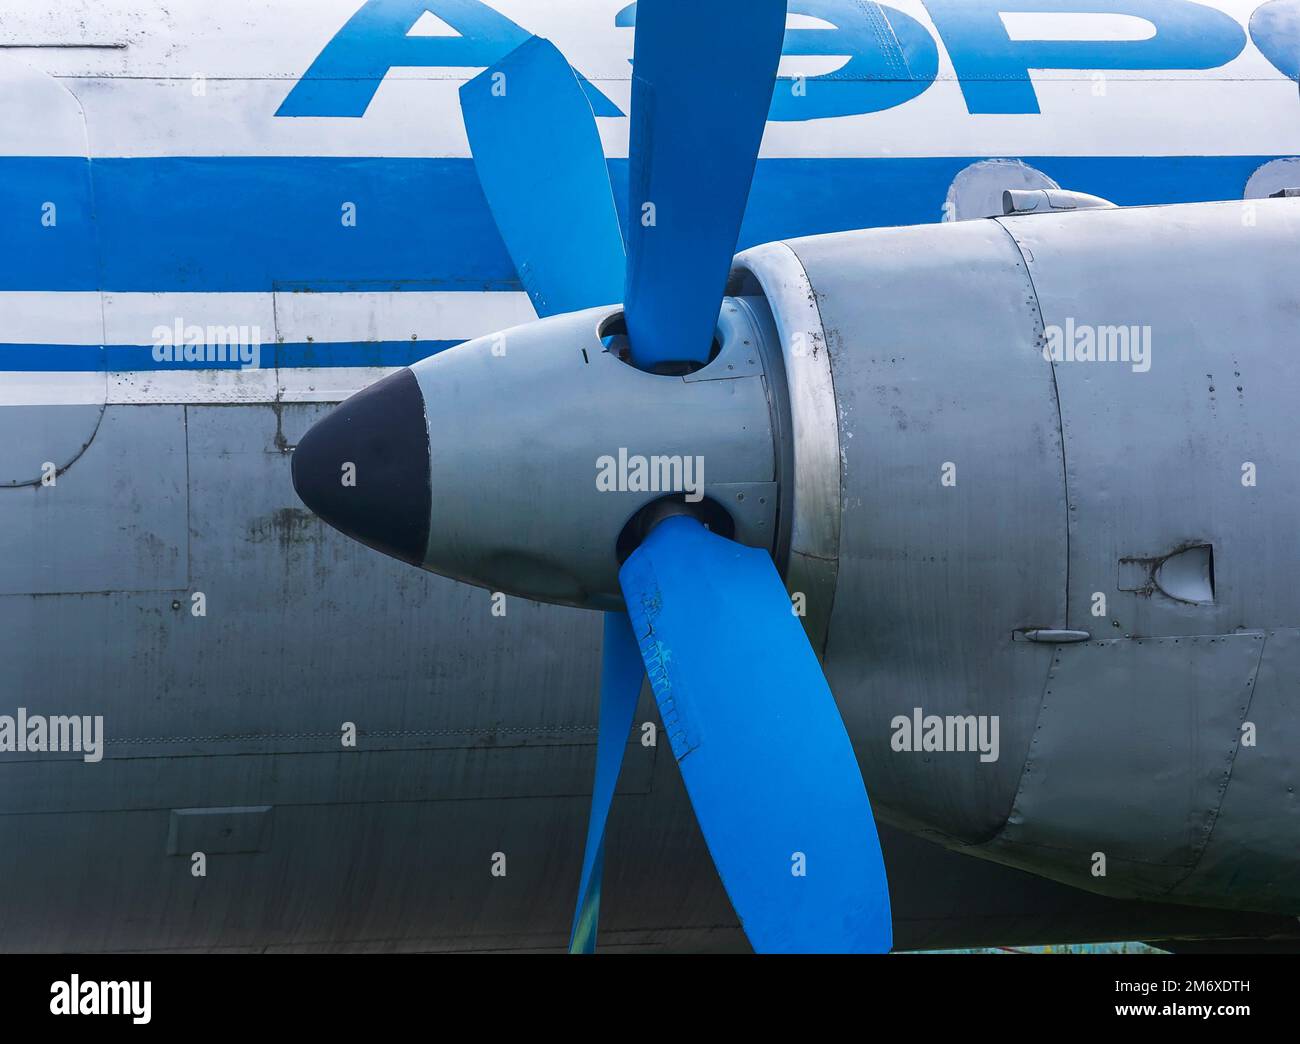 Propeller of the main engine of the civil aviation aircraft Stock Photo